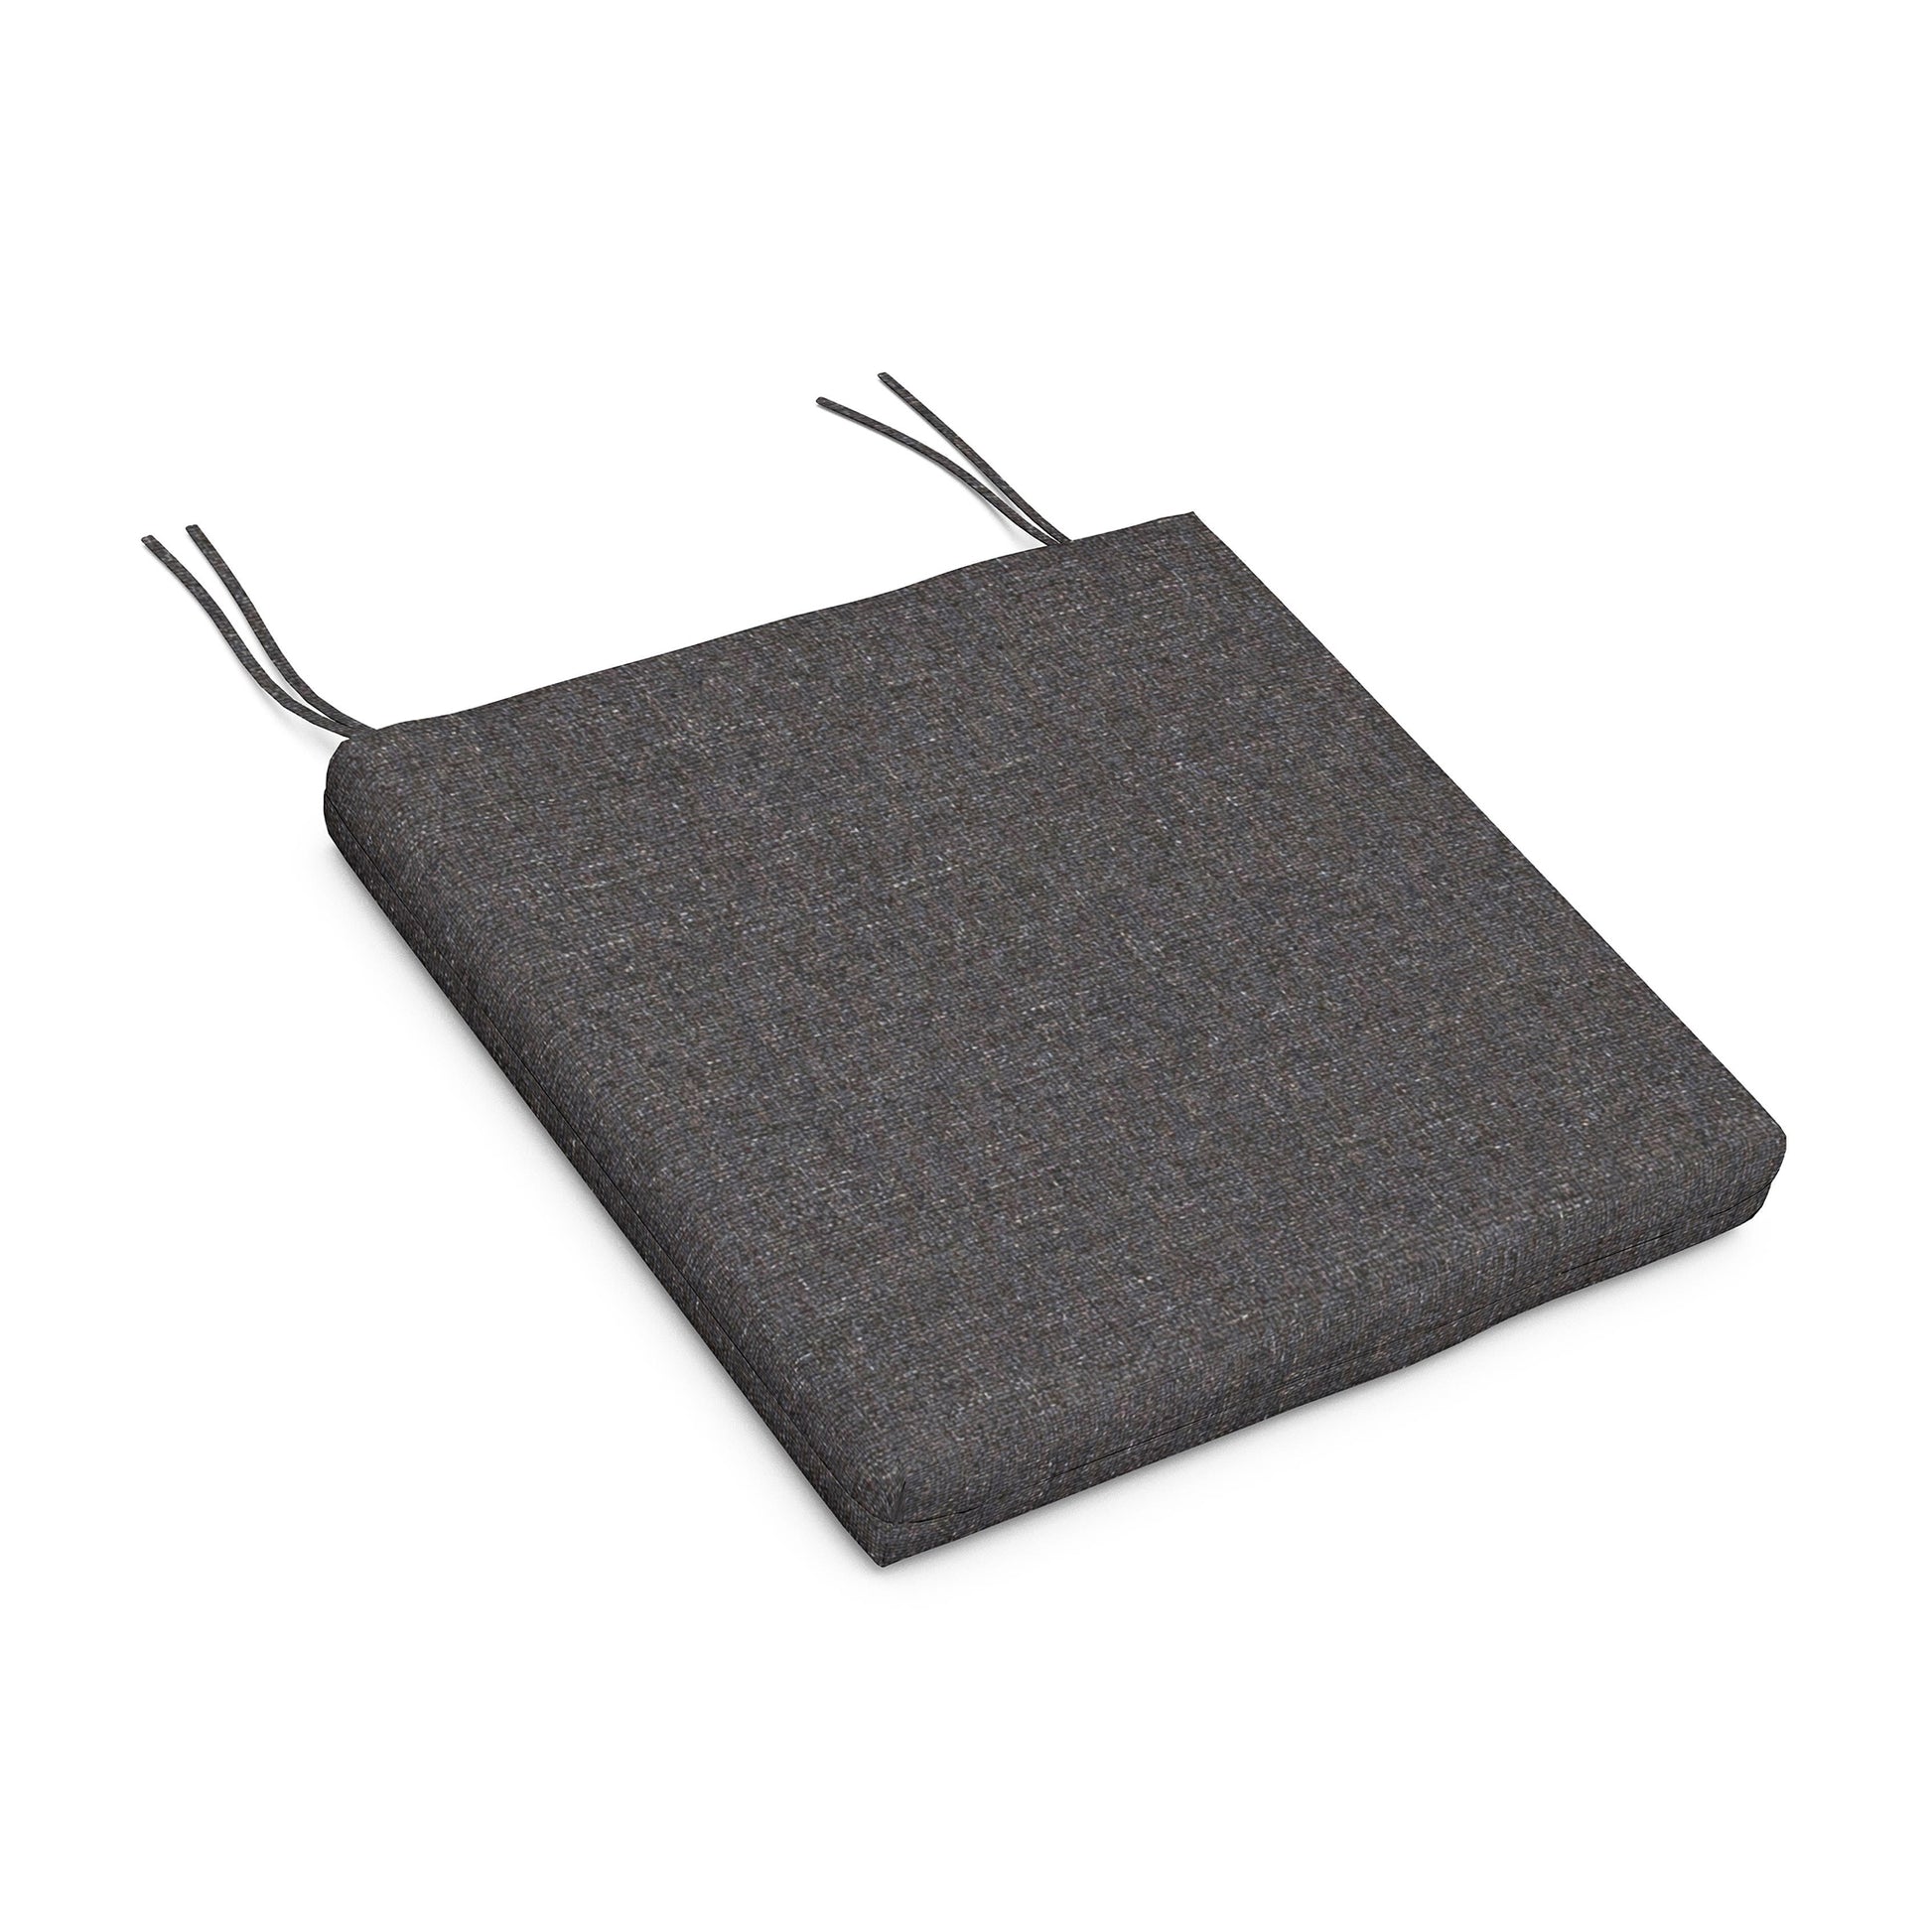 A gray, square-shaped electronic component with two metal leads protruding from one side, isolated on a white background, reminiscent of the minimalist design of a POLYWOOD Classic Adirondack Chair seat cushion.